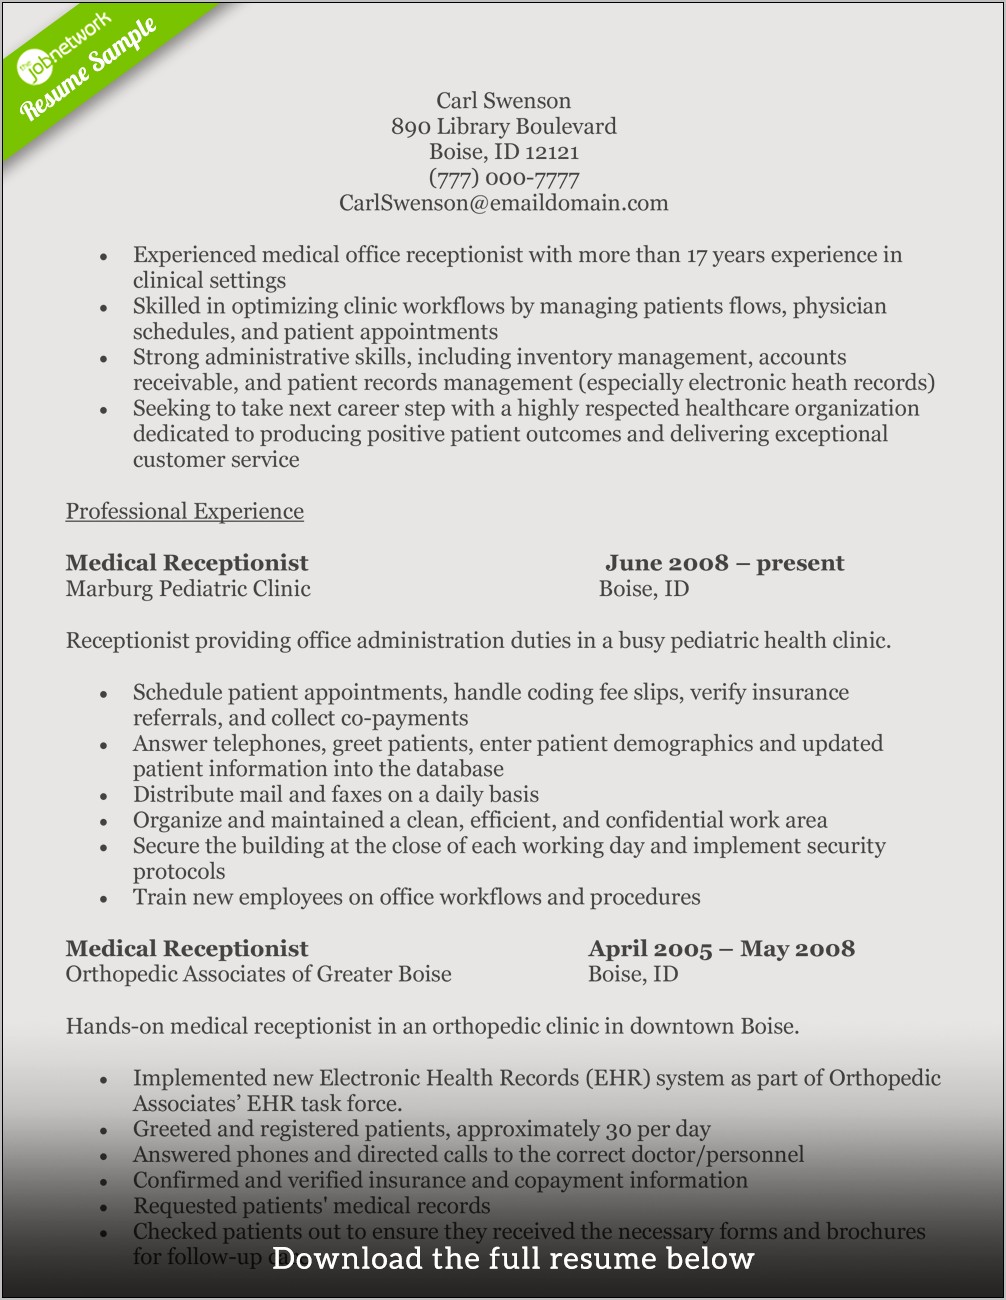 Example Resume For A Receptionist At A Vet